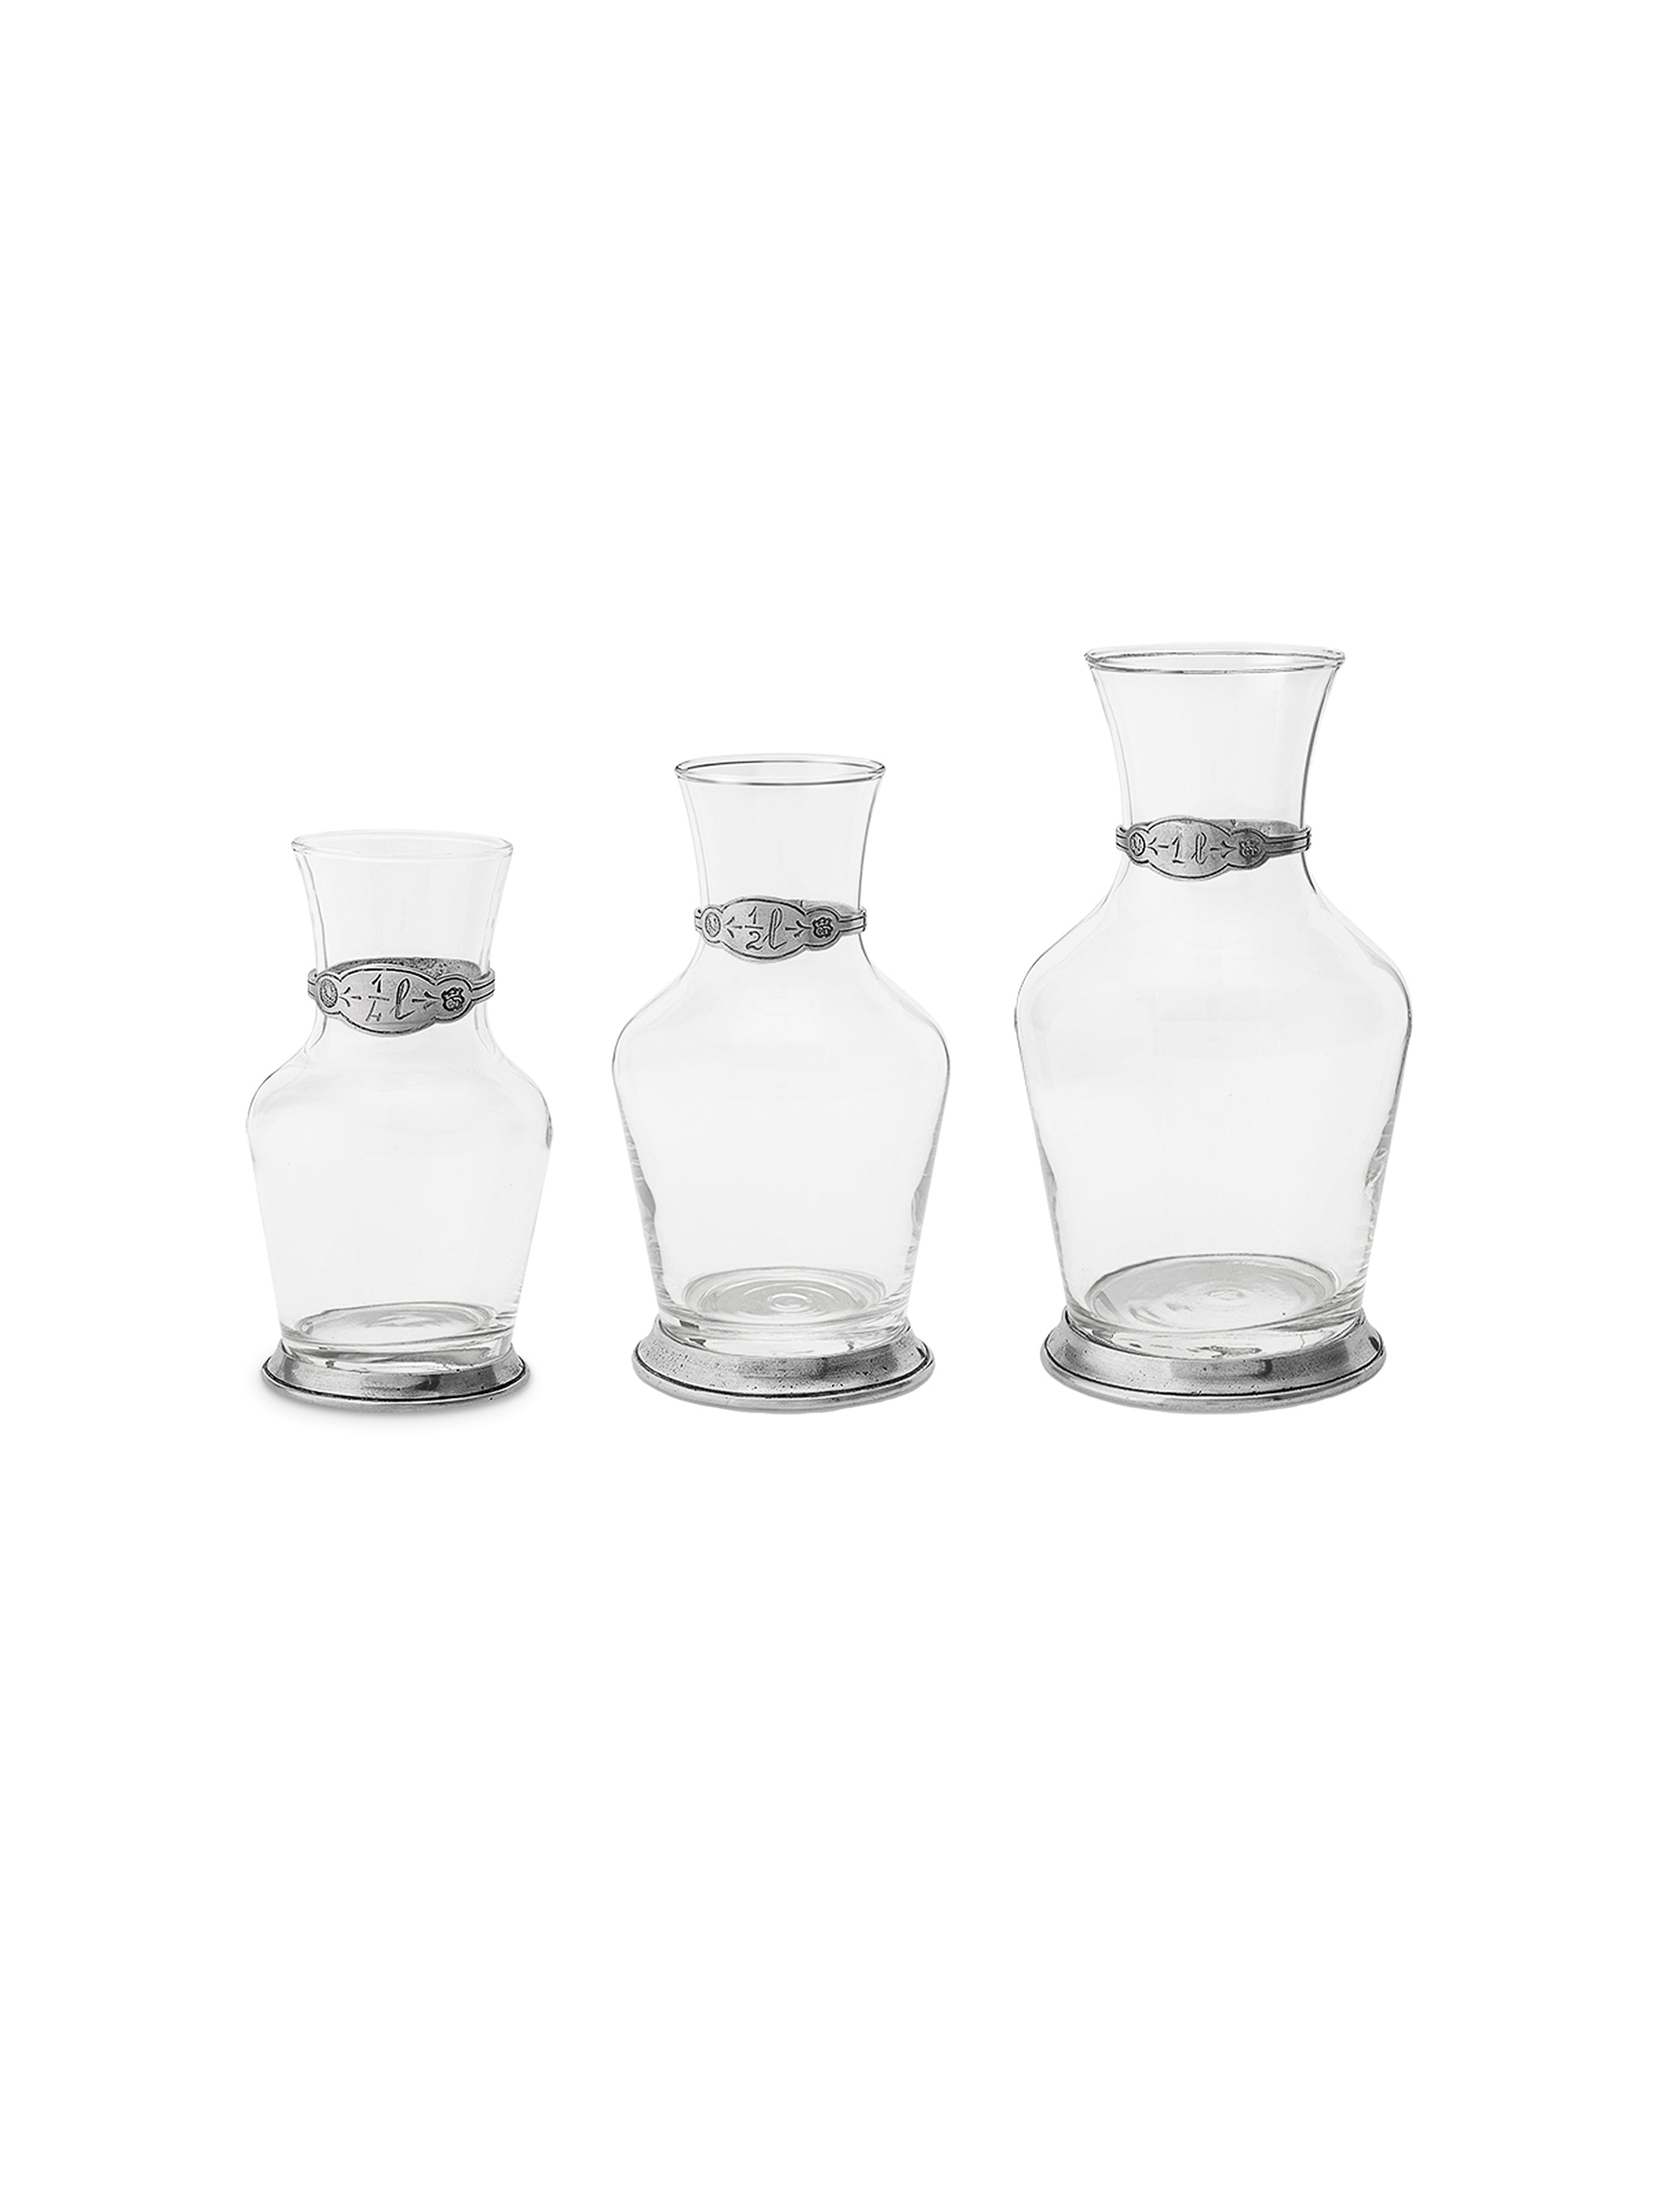 Carafes & Pitchers - Categories - Products